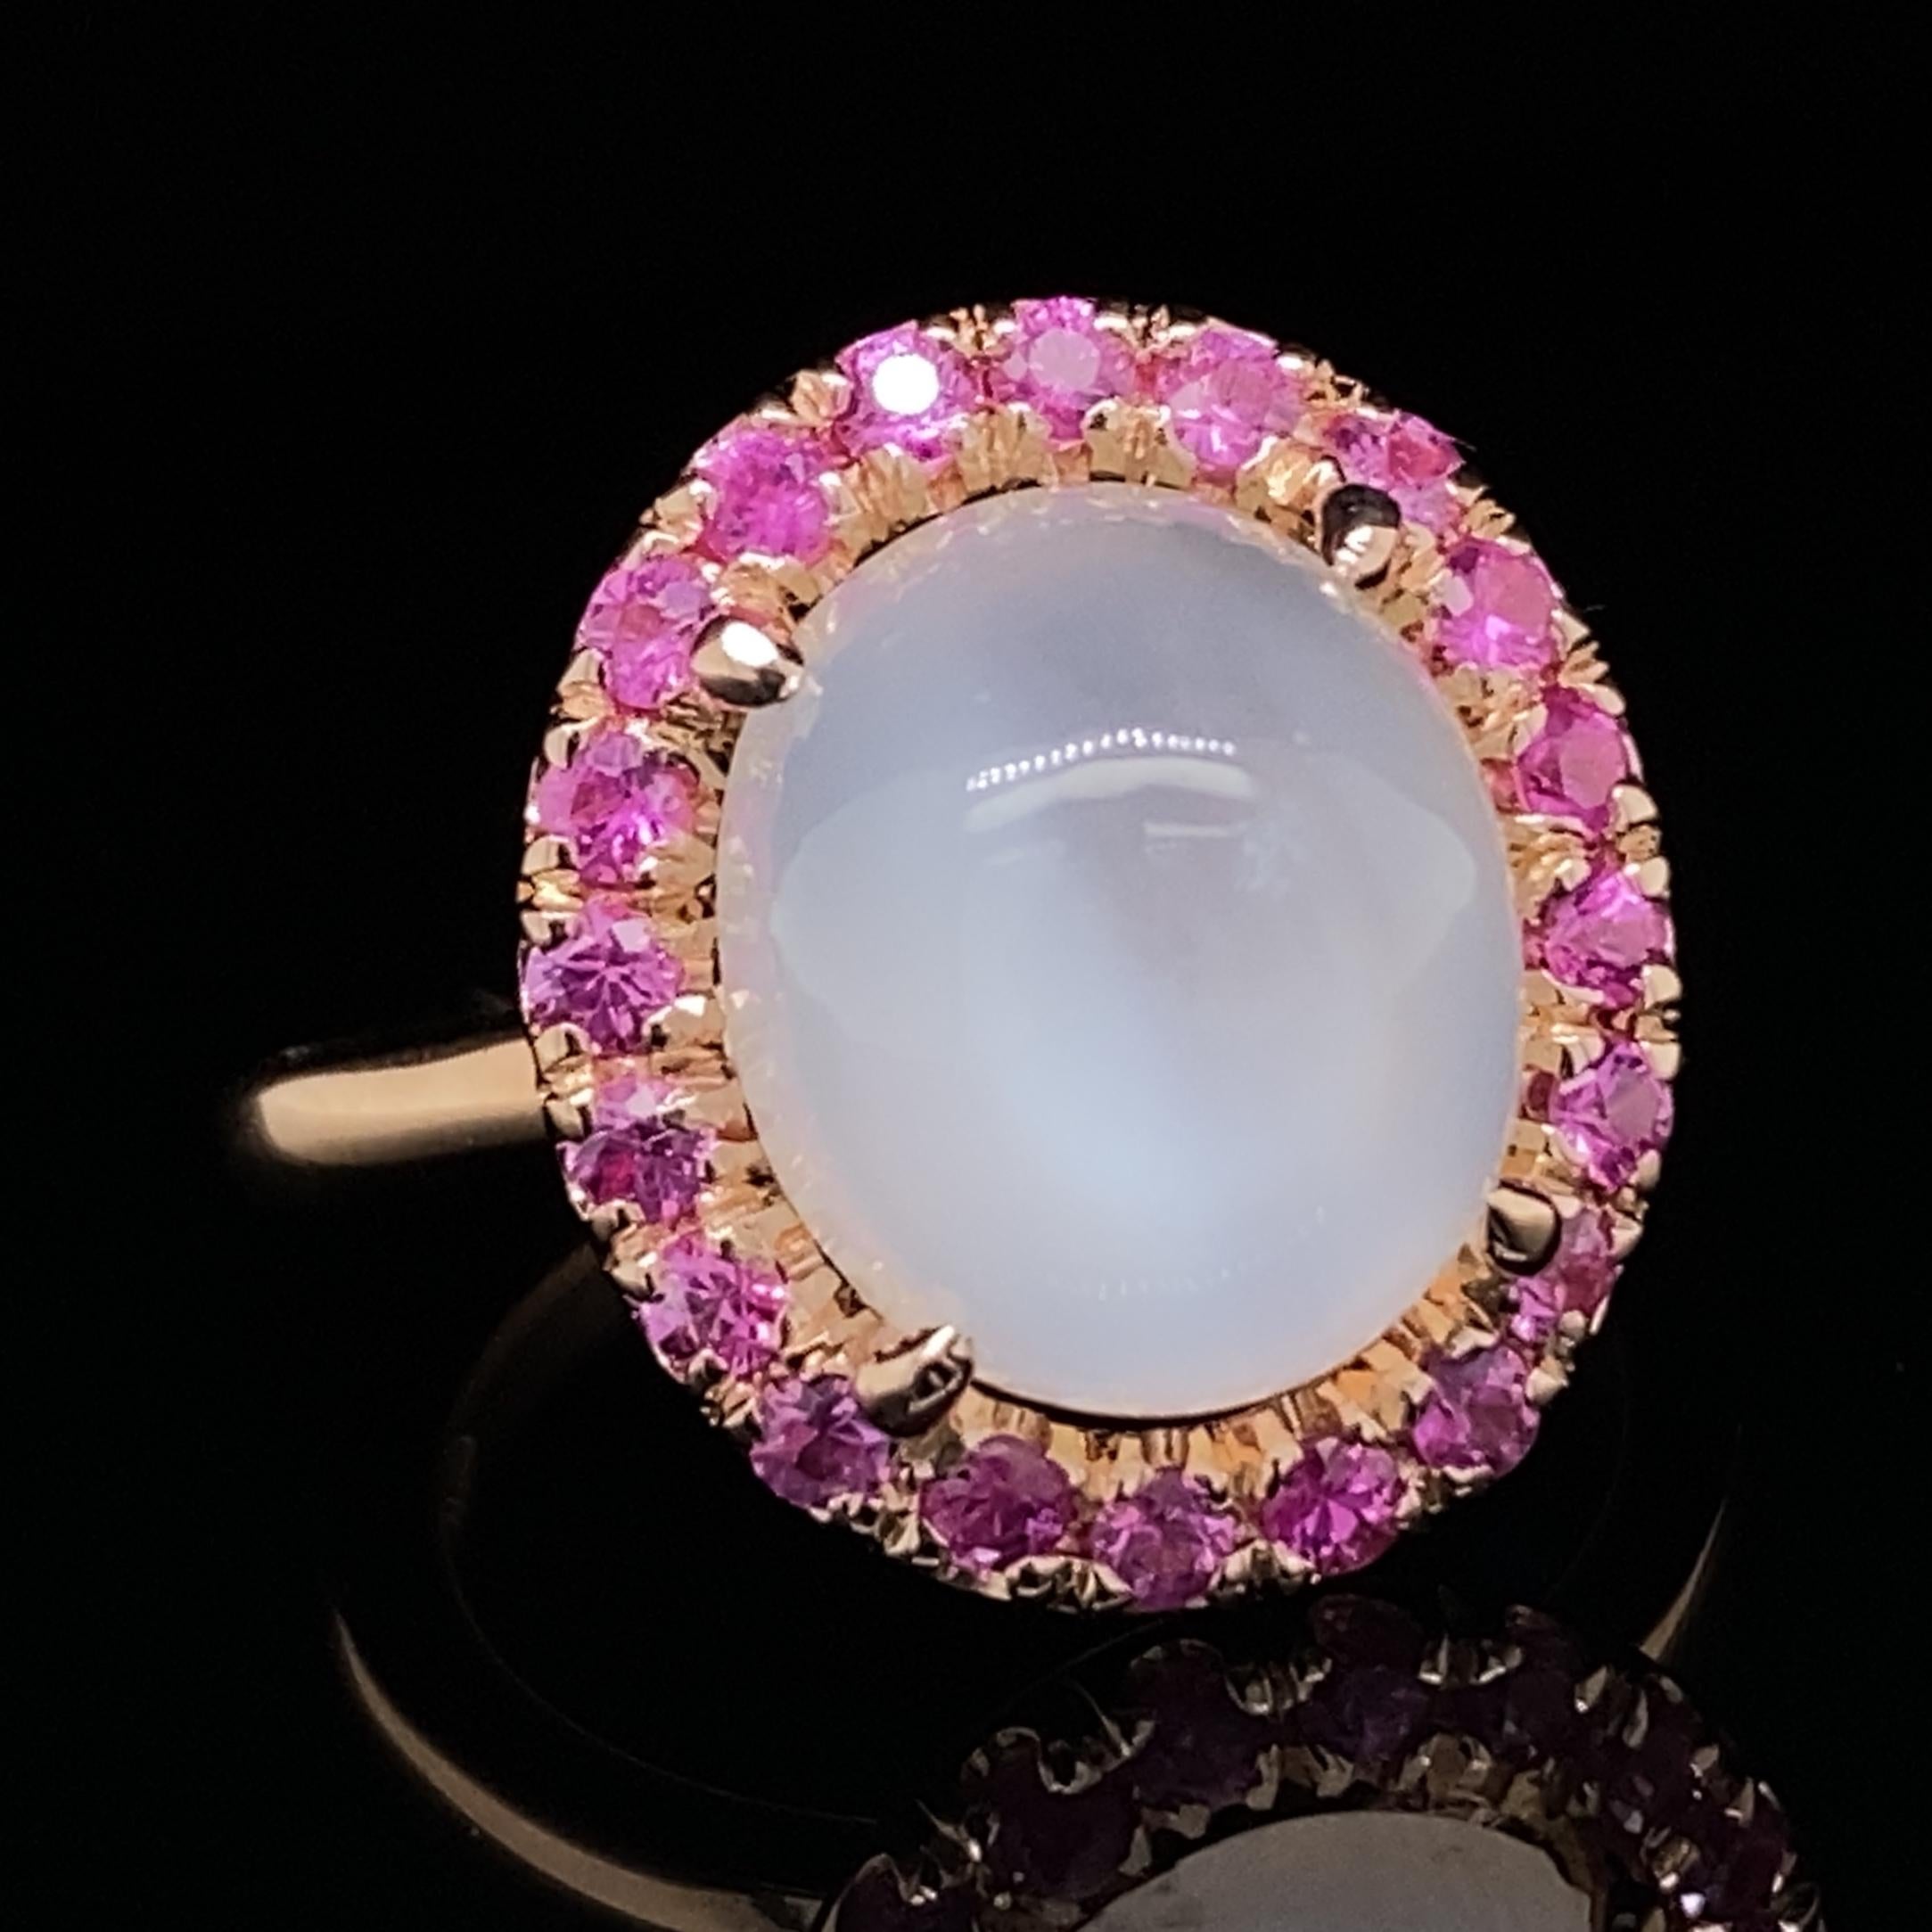 This gorgeous, cheerful ring by Eytan Brandes shows off a high-dome moonstone cabochon with exceptional chatoyancy.  The drama of the center stone really pops thanks to its halo of twenty vivid pink Burmese rubies and the unfussy rose gold mounting.